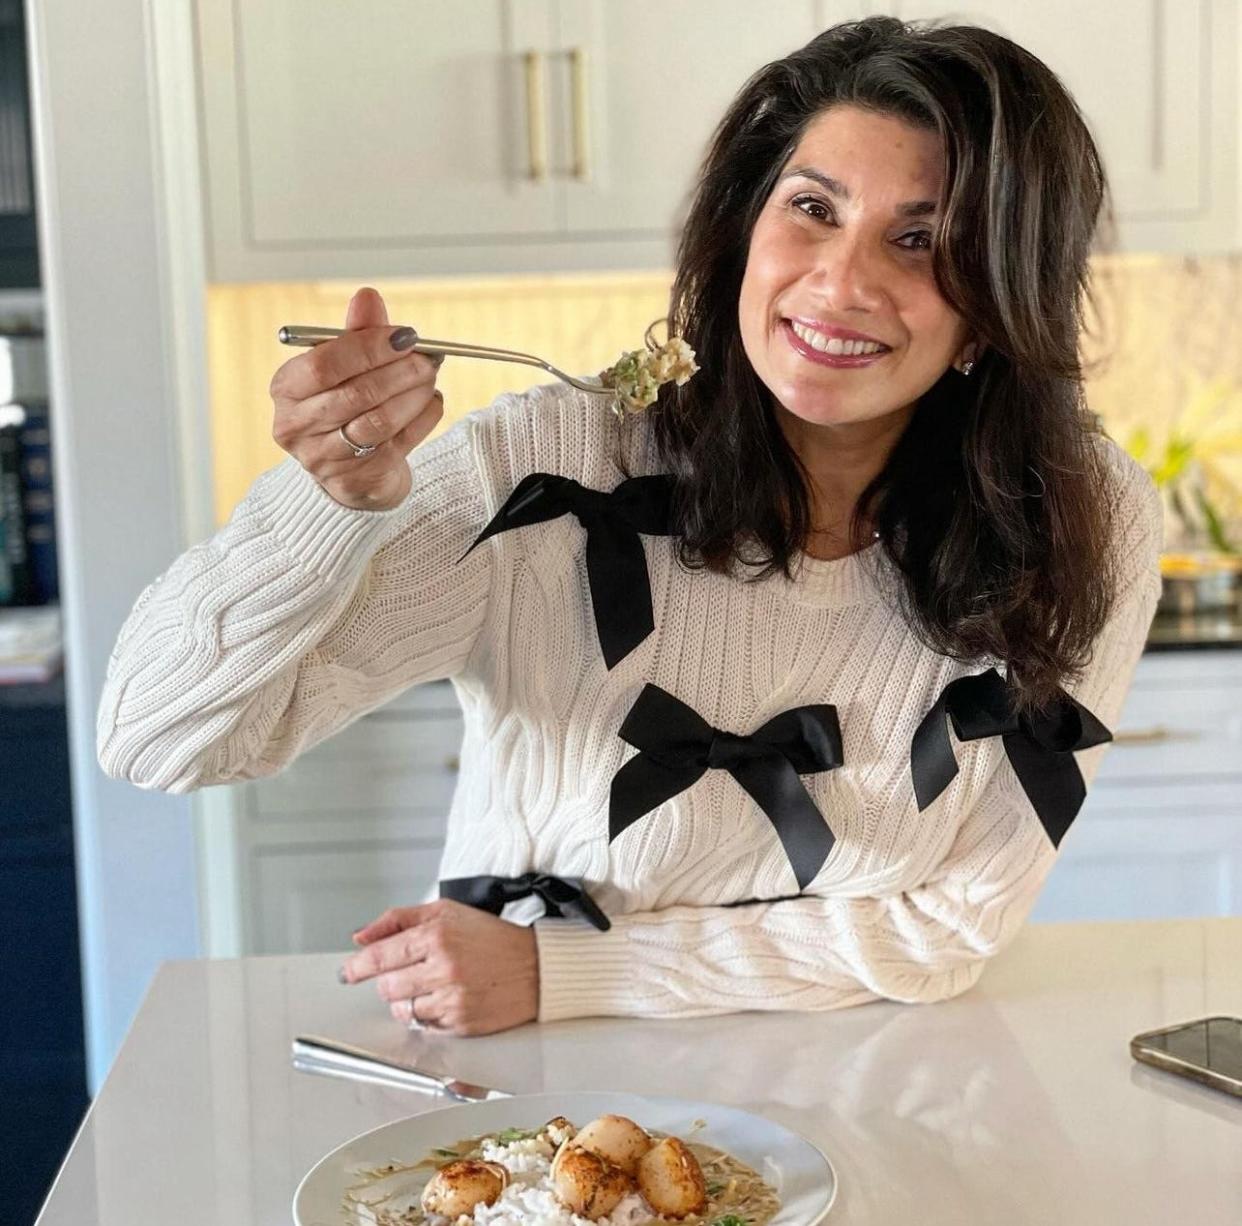 New Albany resident Monika Arora, who teaches cooking classes and produces her own line of Indian spices, can be seen on the Feb. 1 episode of the culinary competition "Next Level Chef." The show airs at 8 p.m. on Fox.